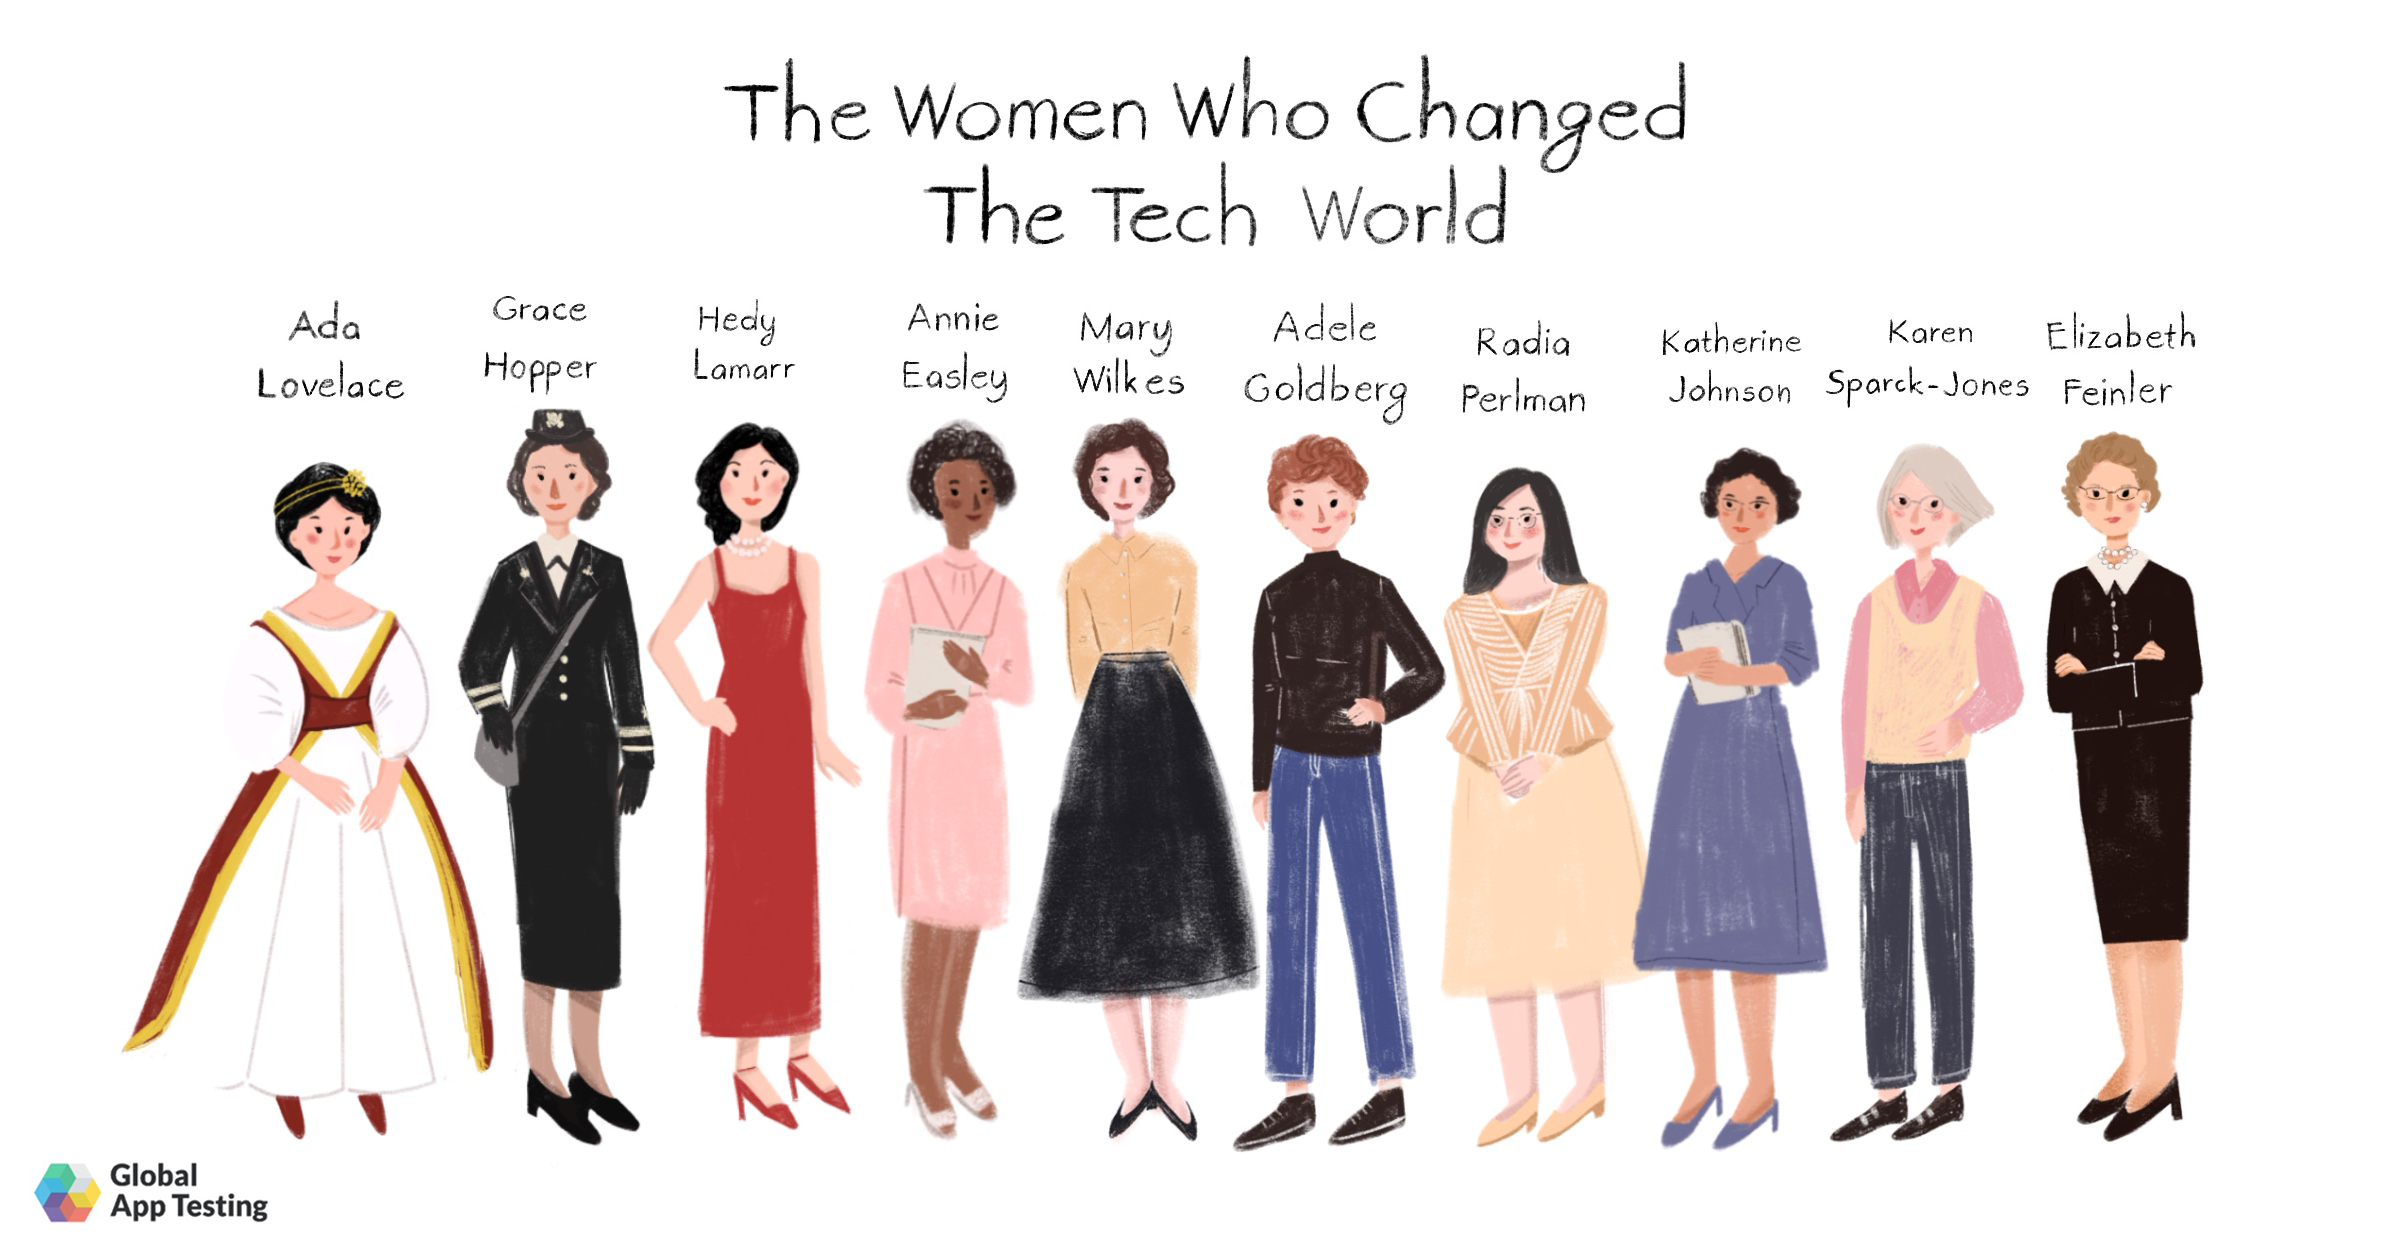 The Women Who Changed The Tech World